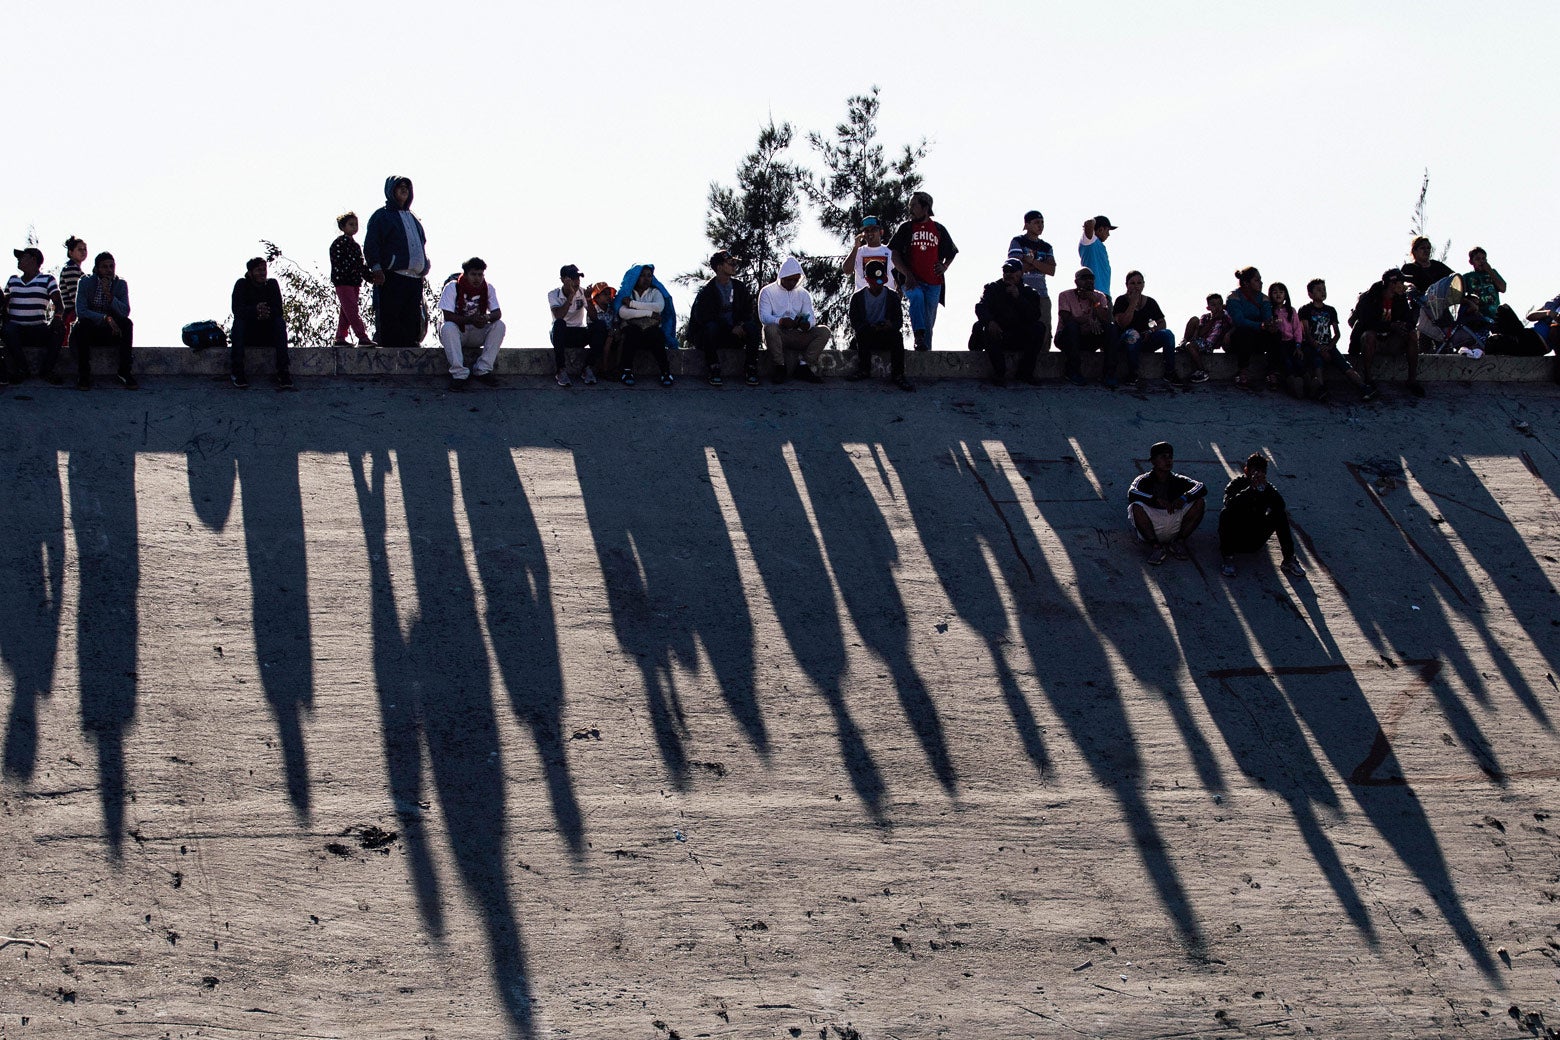 Migrants sitting on a concrete wall cast long shadows.